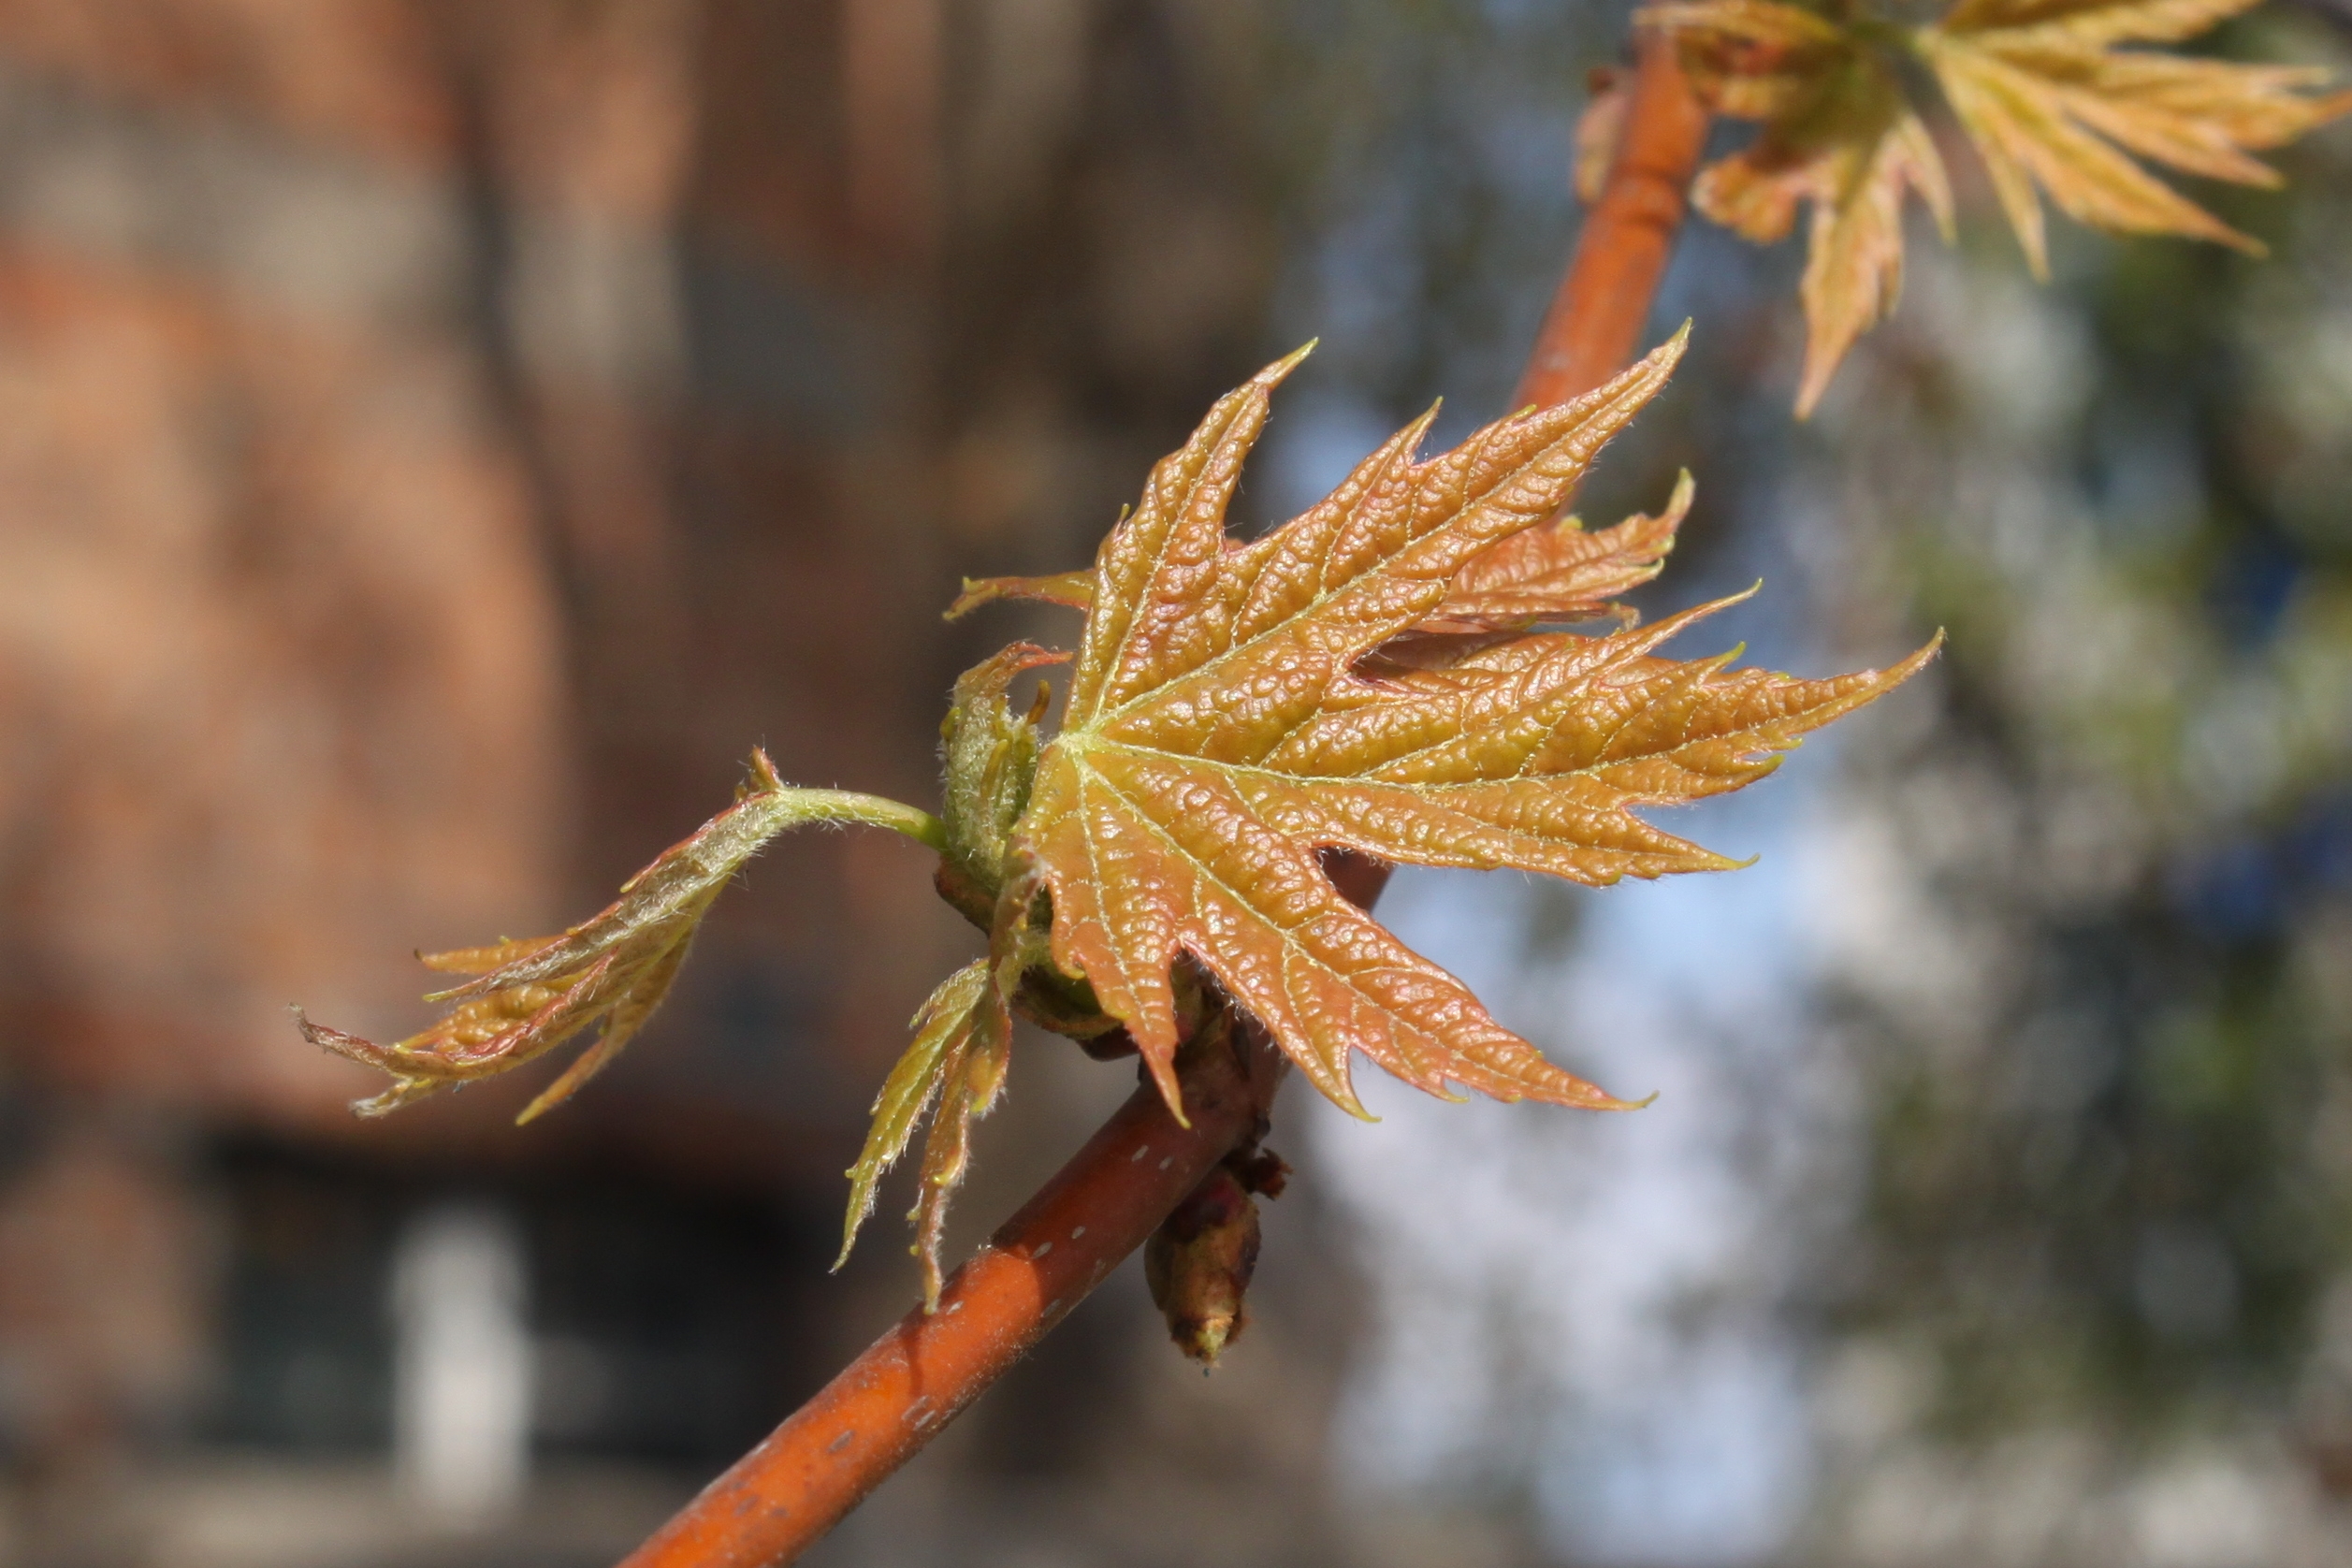 Acer saccharinum young leaves